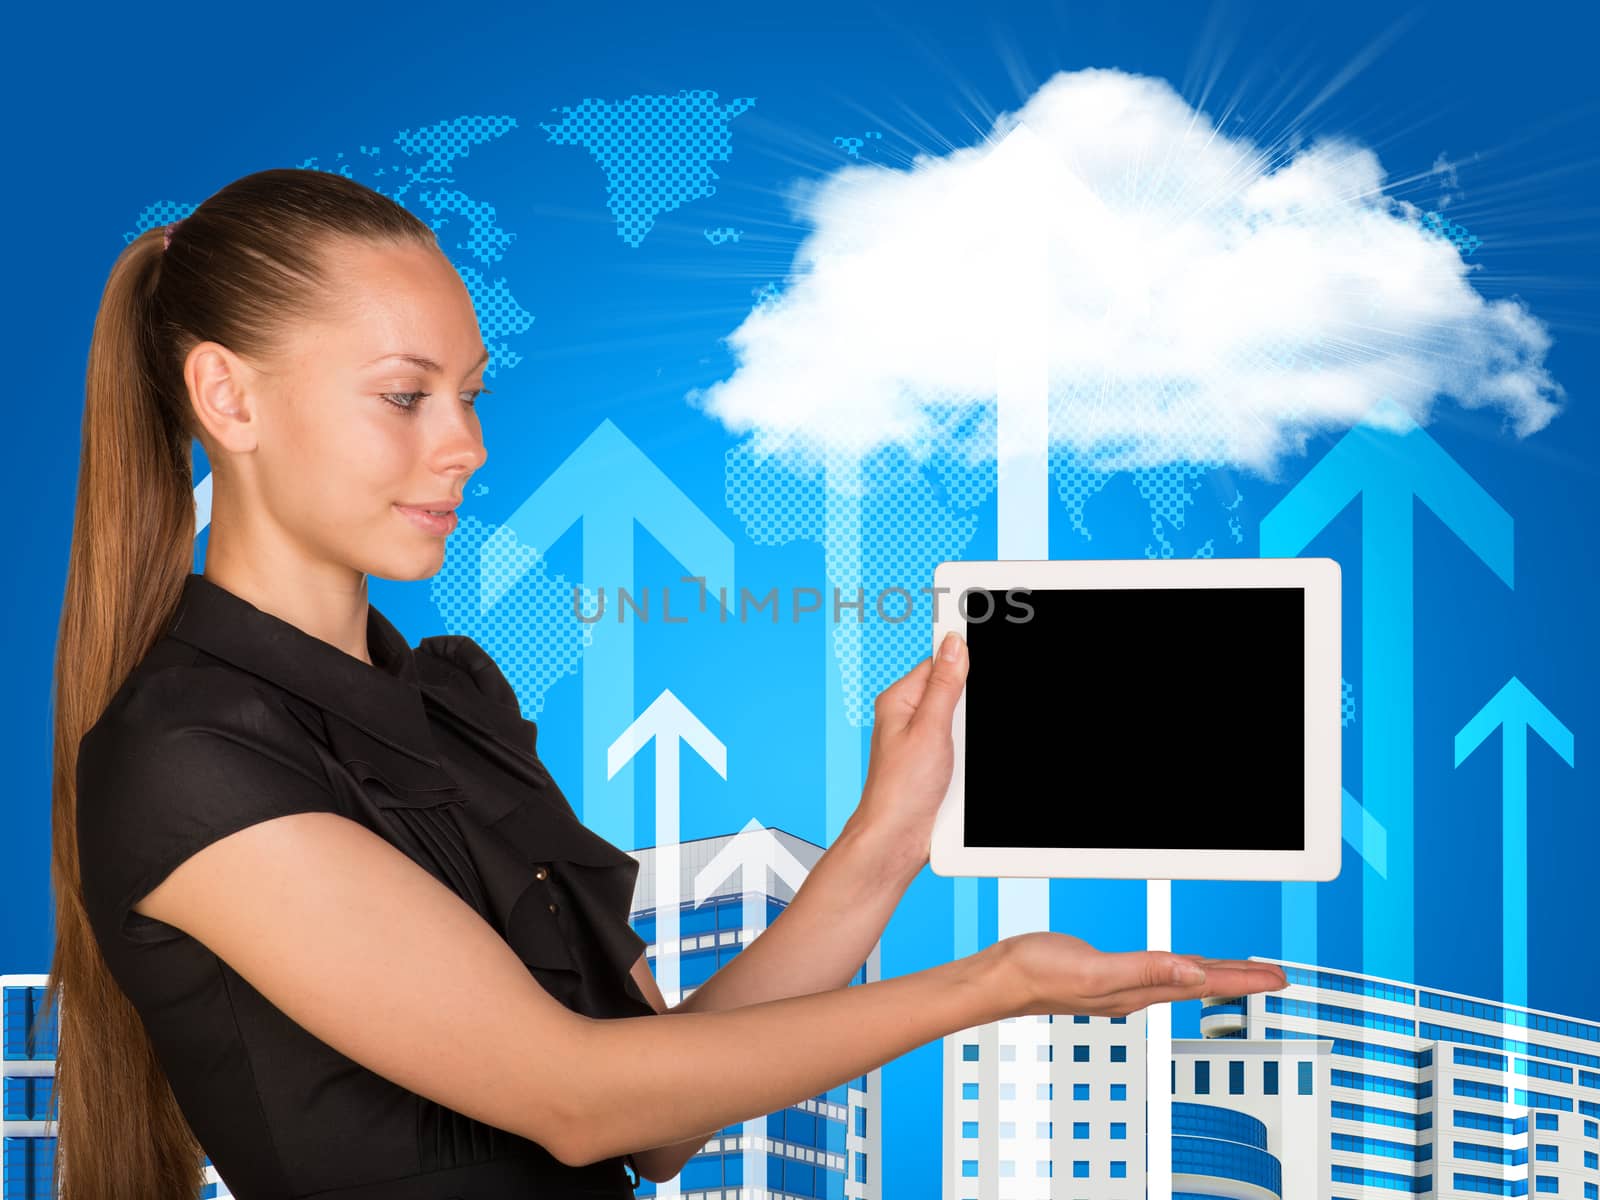 Beautiful businesswoman in dress holding tablet pc. White cloud, arrows and buildings as backdrop